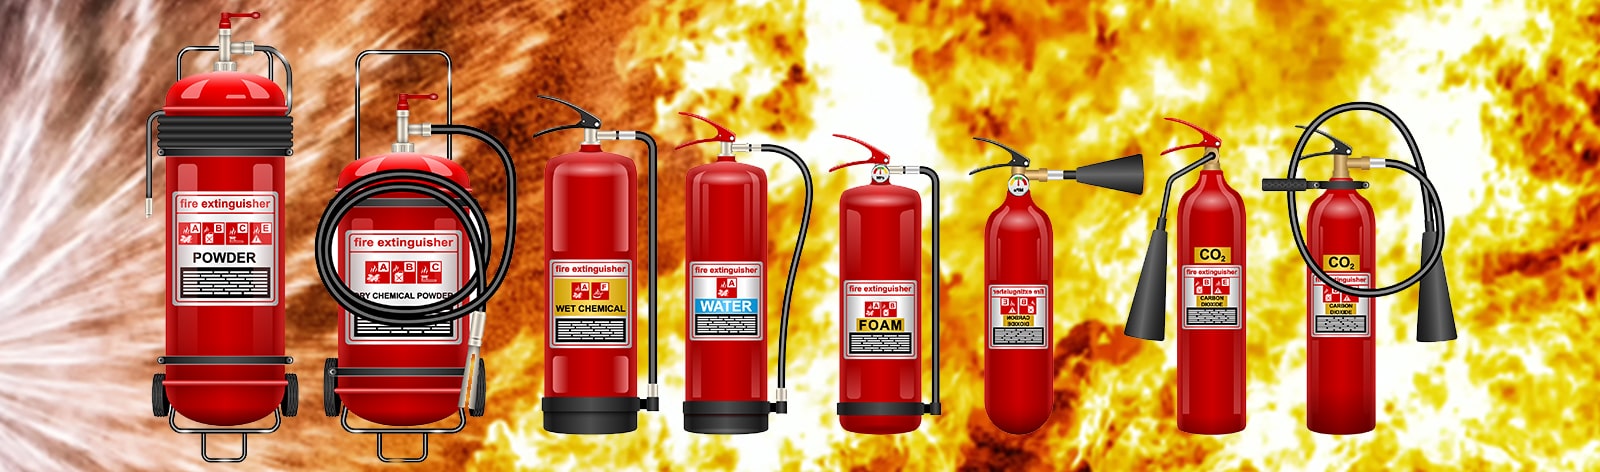 Fire Safety Equipments Manufacturer in Pune